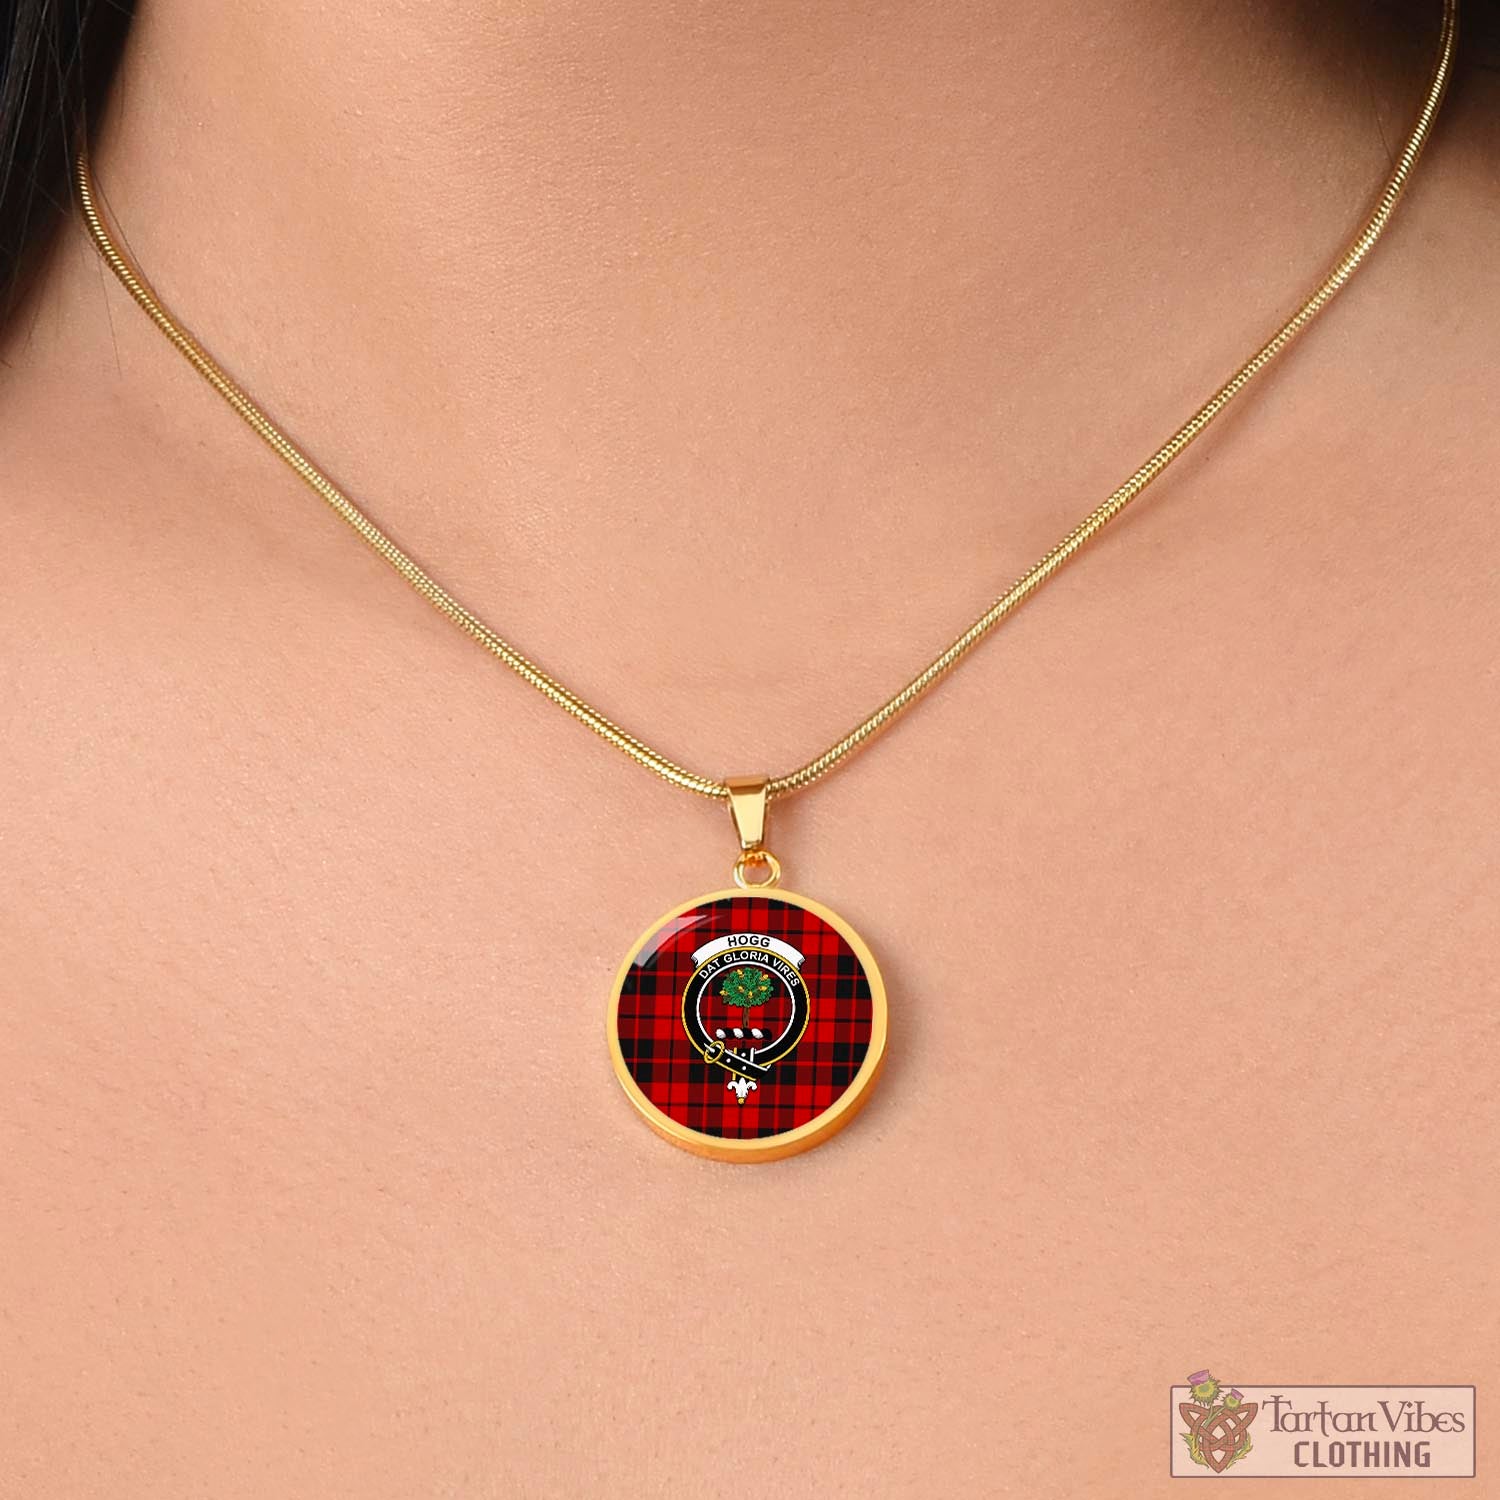 Tartan Vibes Clothing Hogg Tartan Circle Necklace with Family Crest